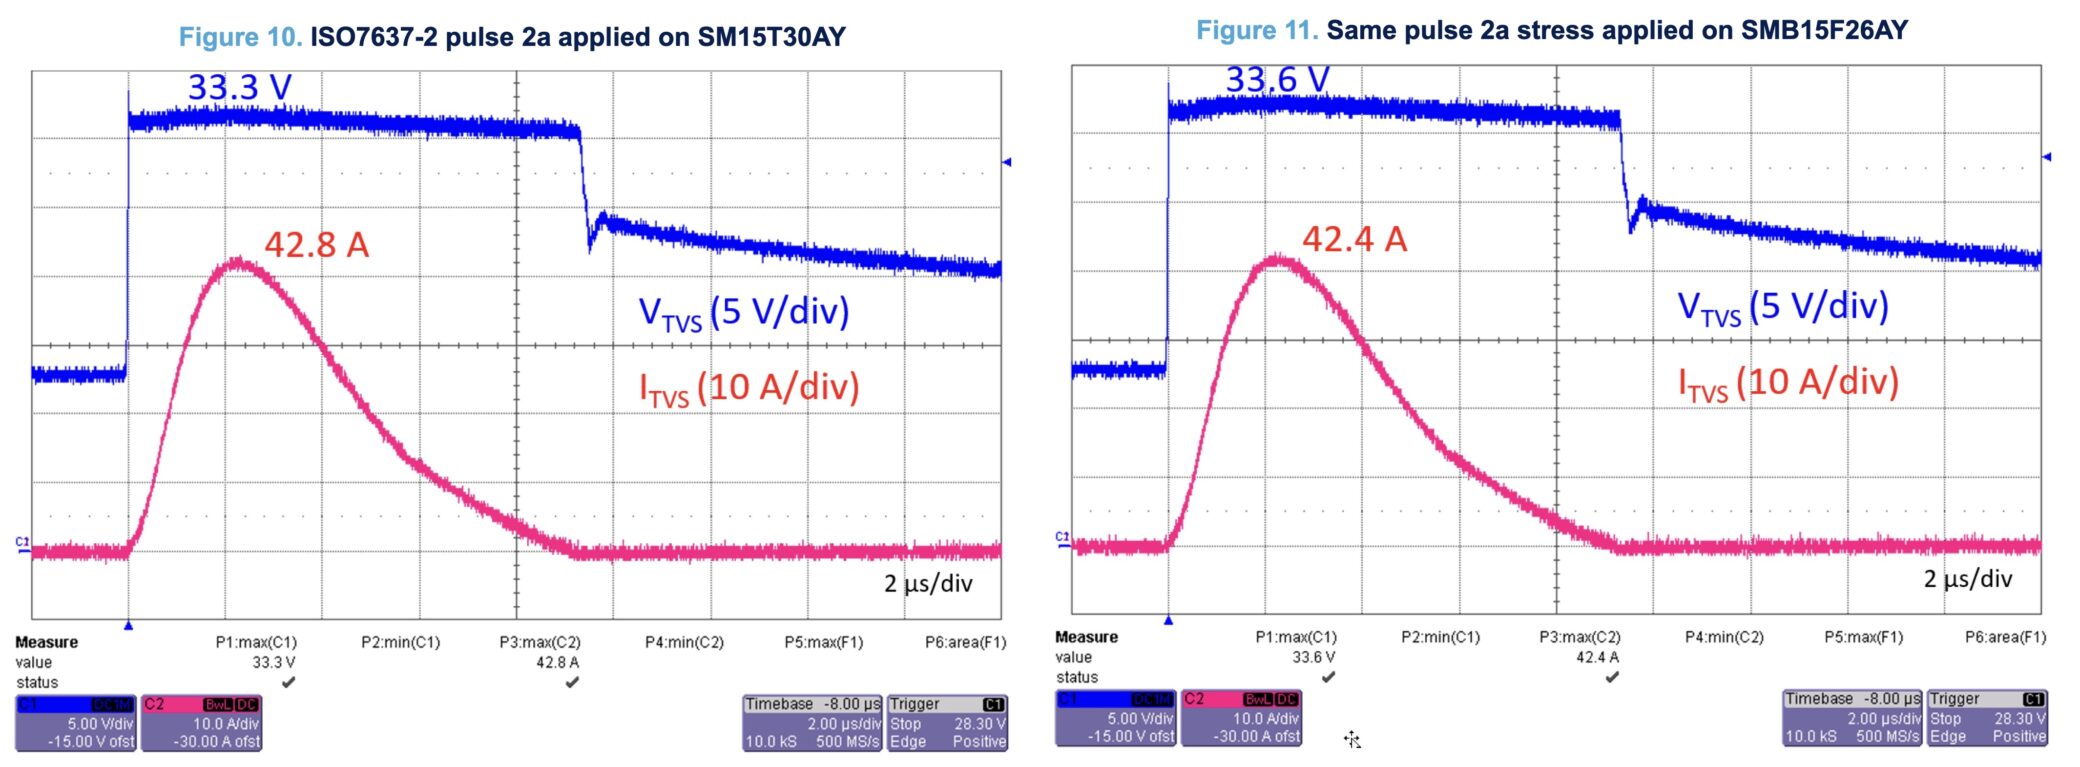 Waveforms comparison between SMC (Figure 10) and SMB Flat (Figure 11) devices